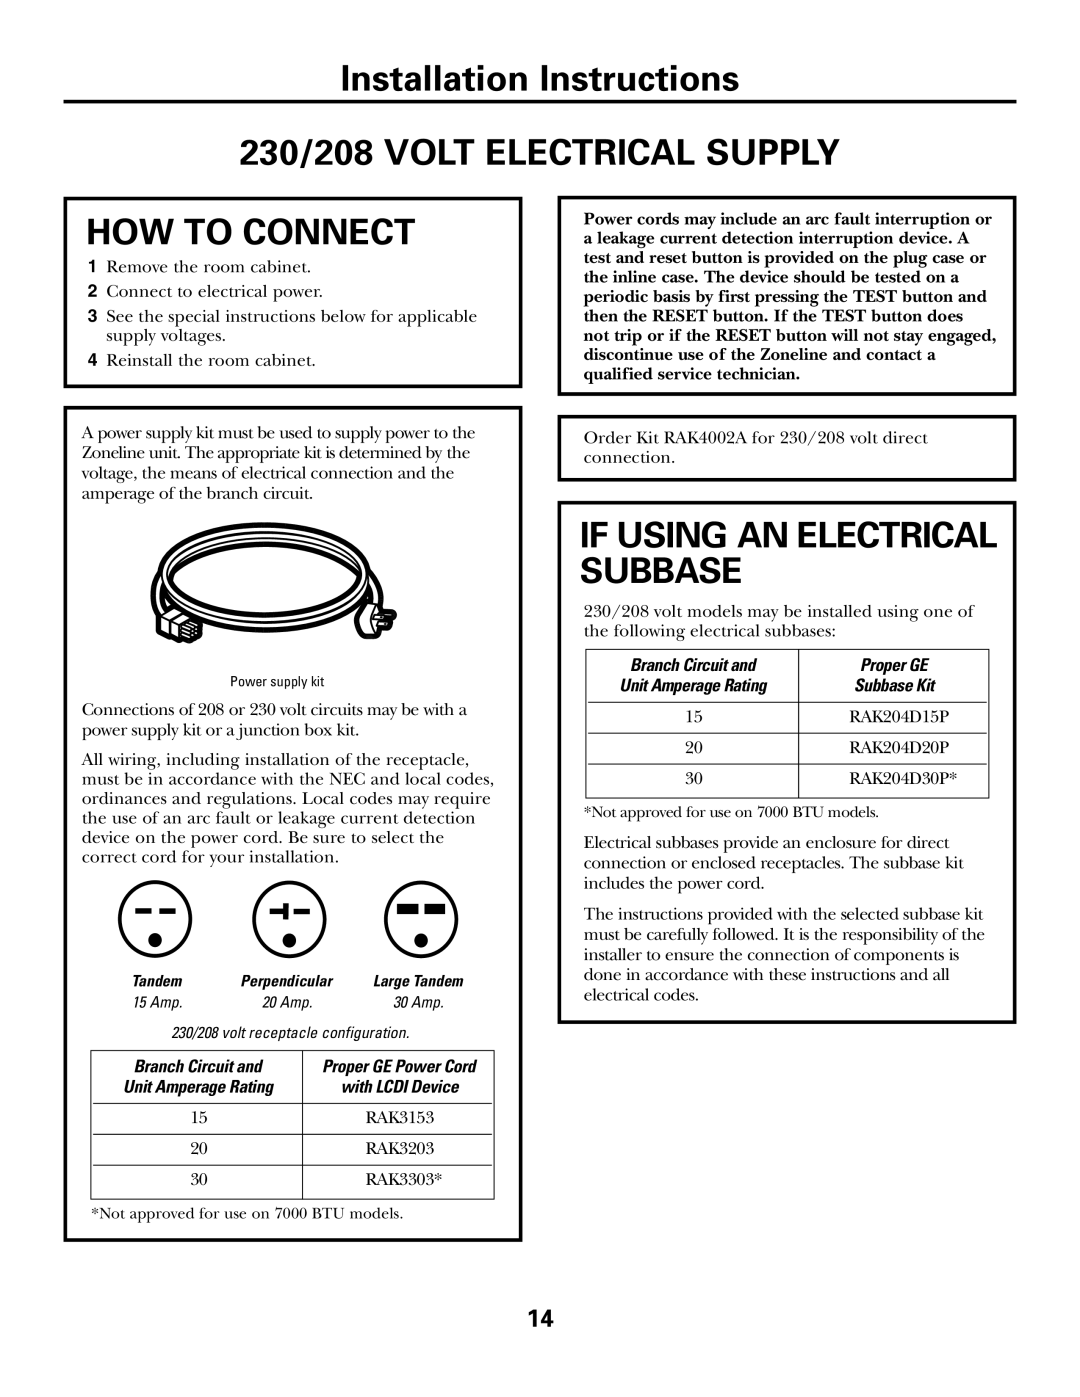 GE 3800 230/208 VOLT ELECTRICAL SUPPLY, How To Connect, If Using An Electrical Subbase, Installation Instructions, RAK3153 